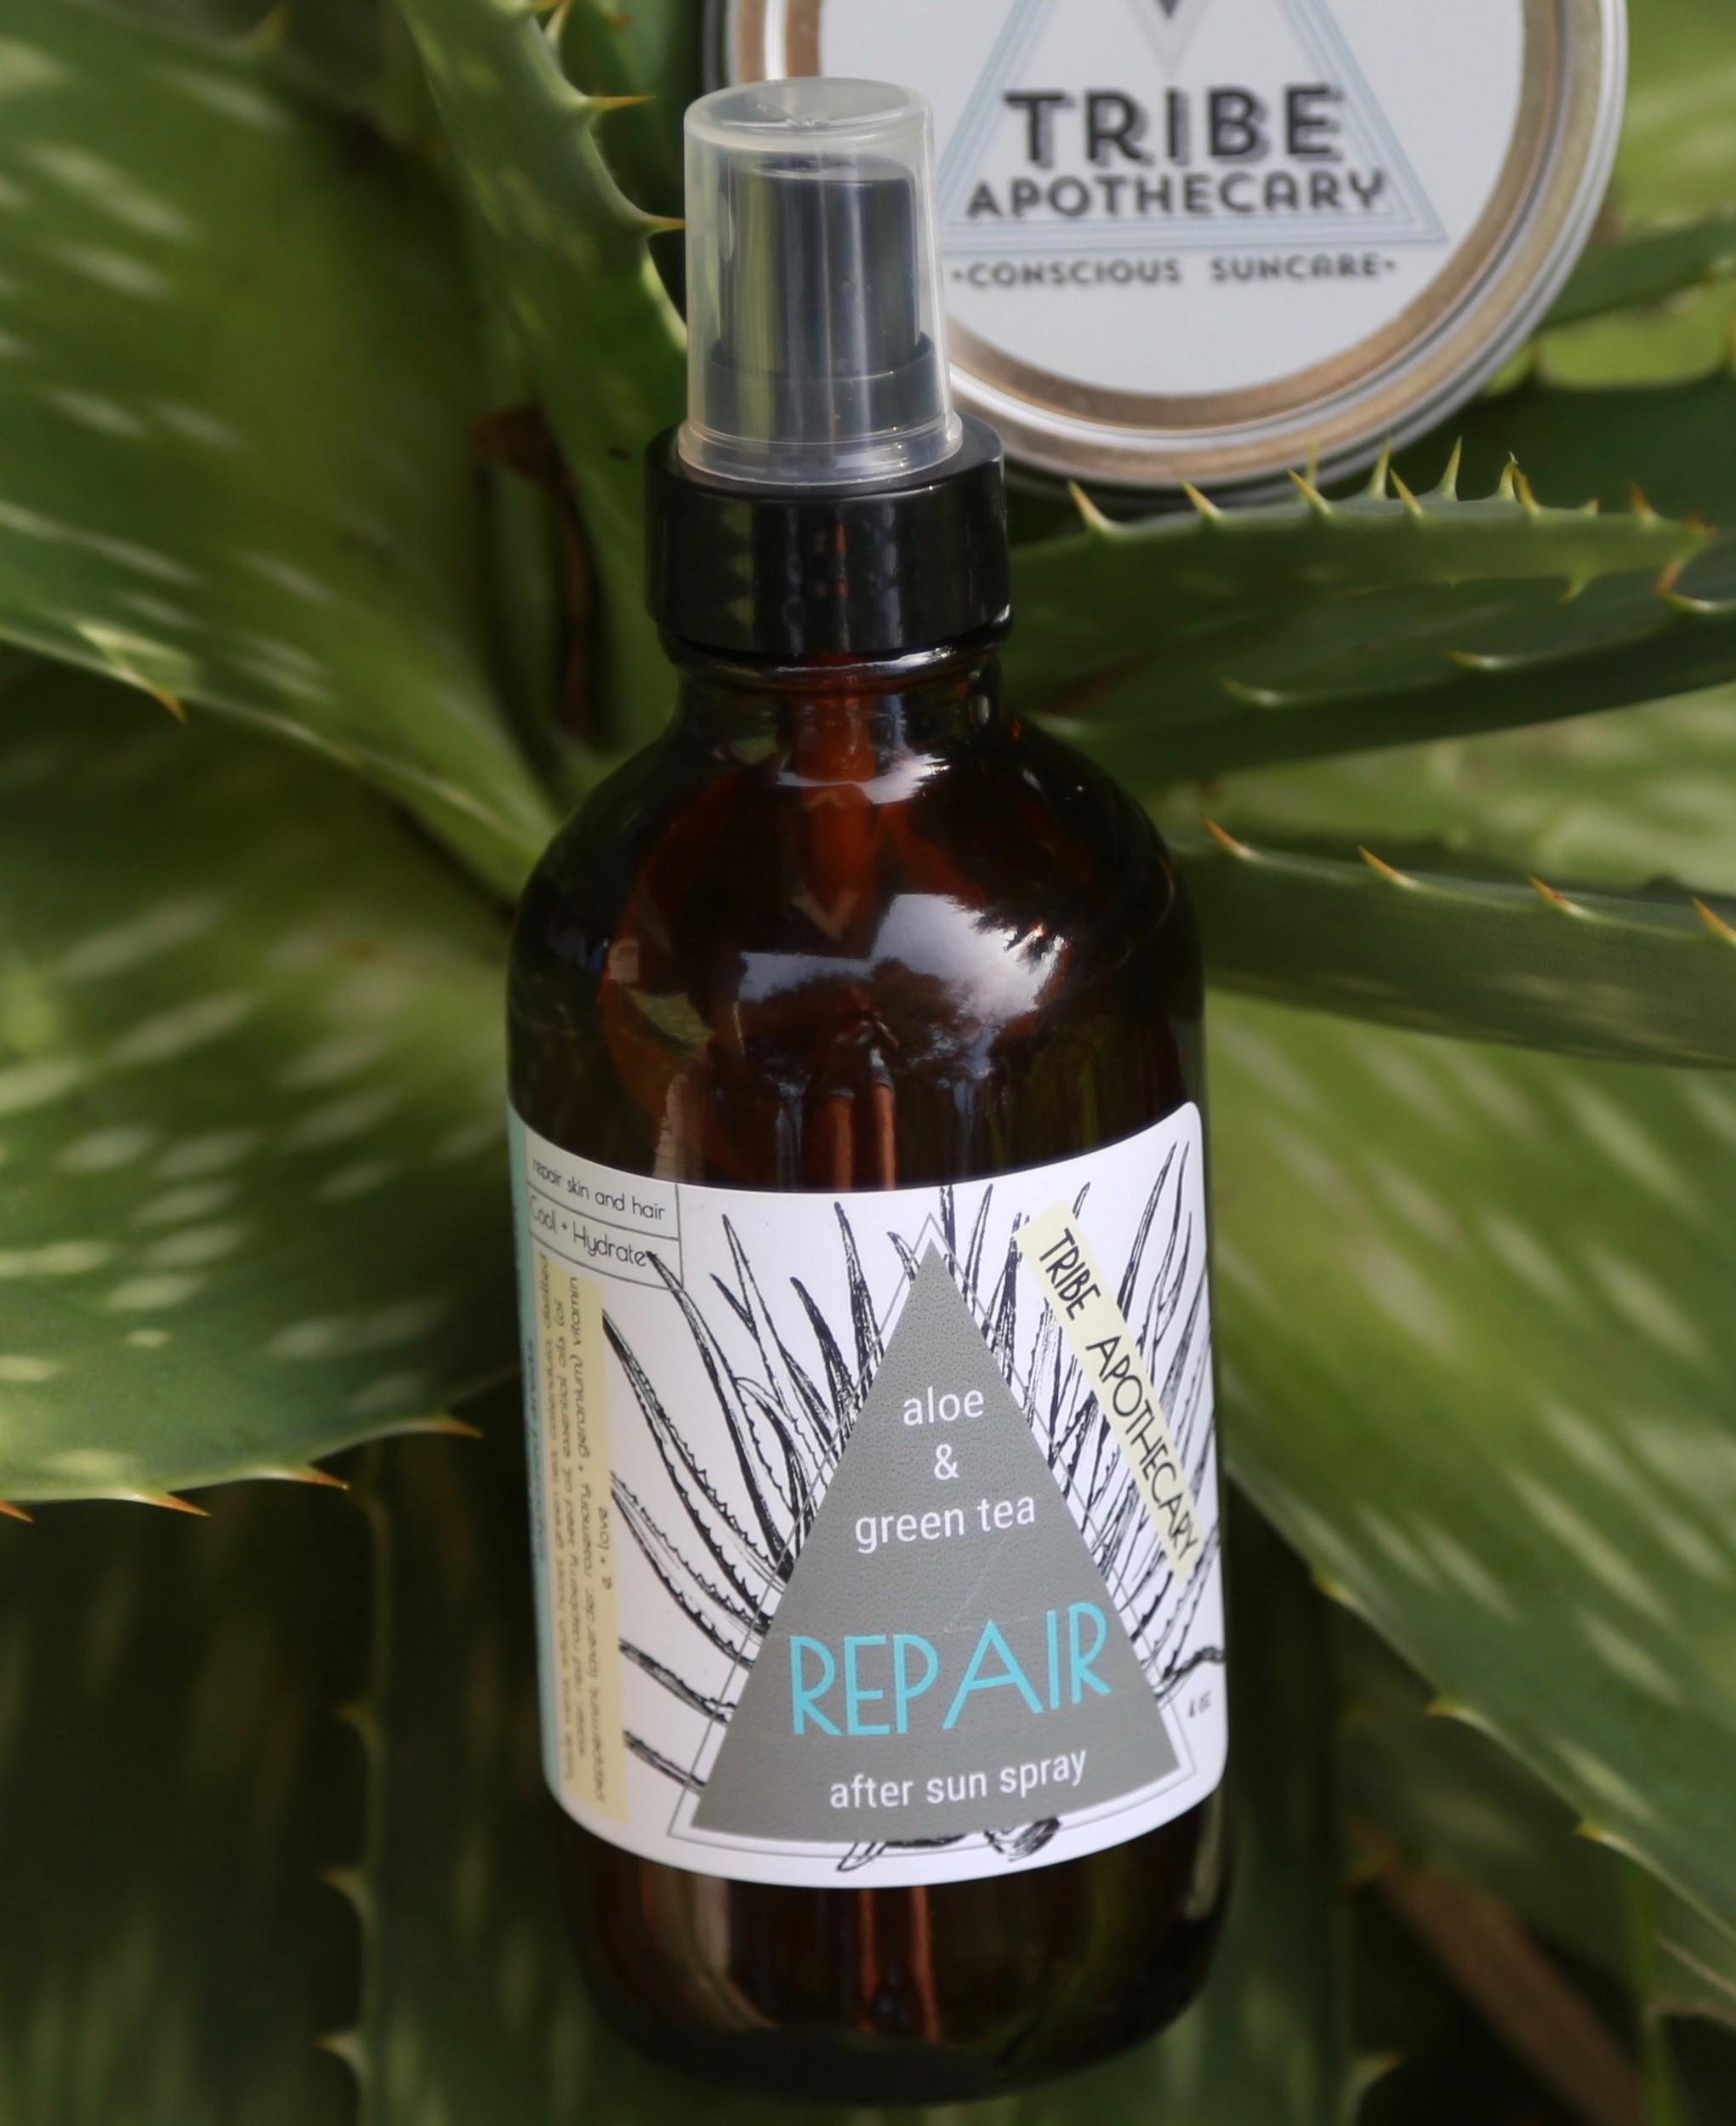 Aloe and green tea after-sun spray from Tribe Apothecary